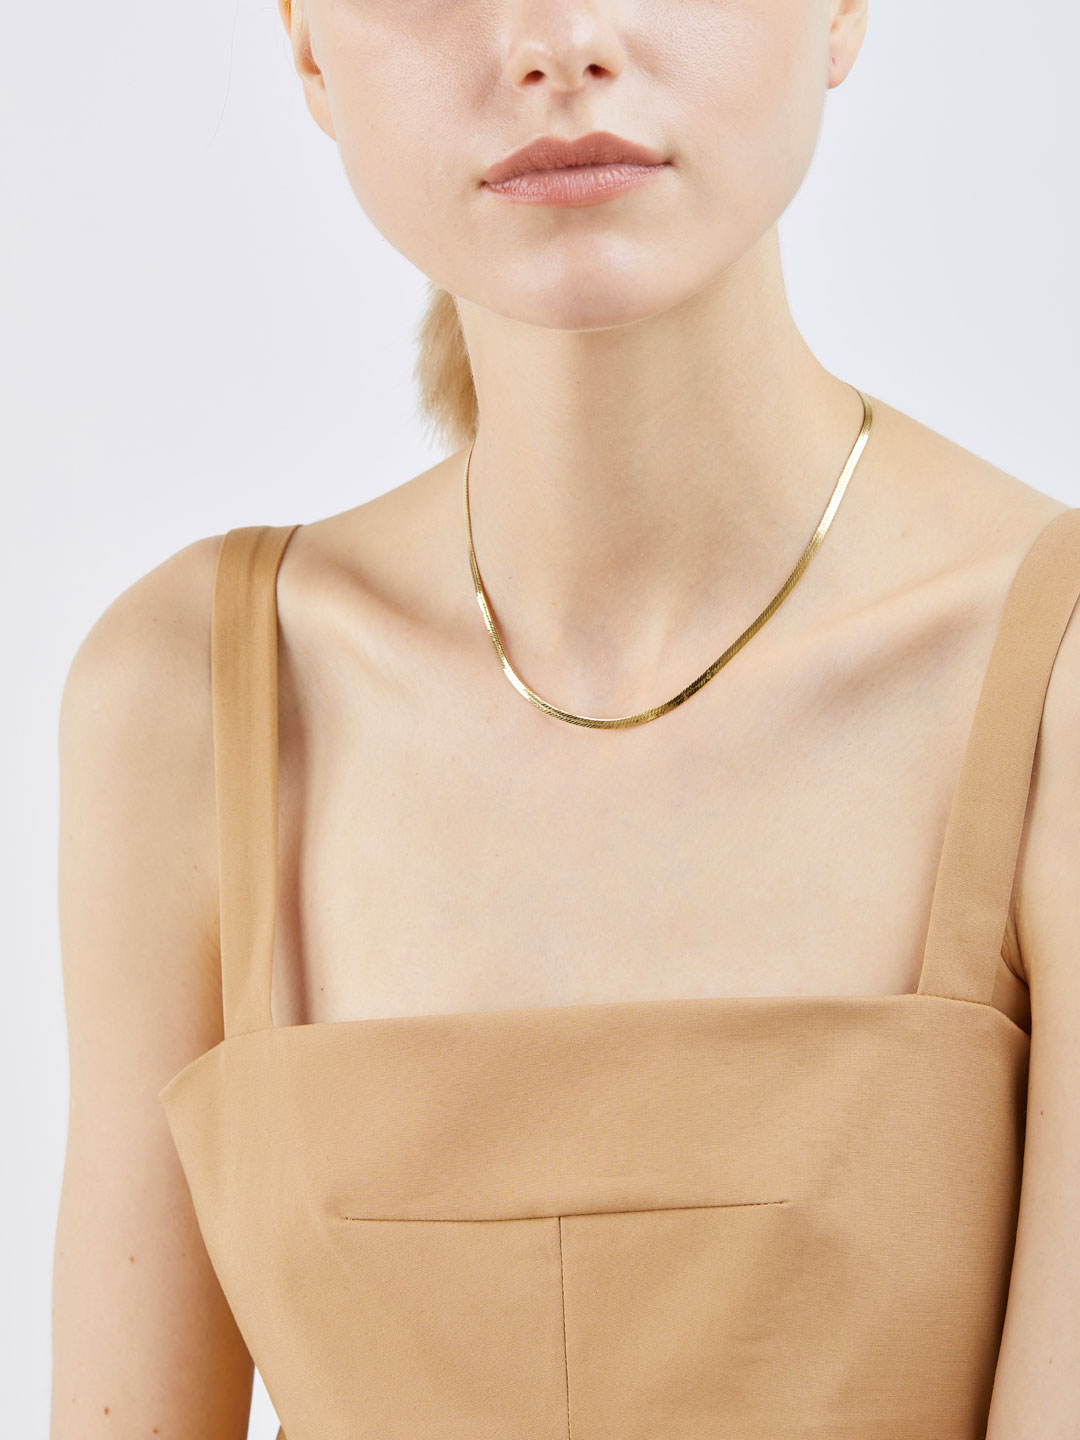 Mio Chain Necklace - Yellow Gold